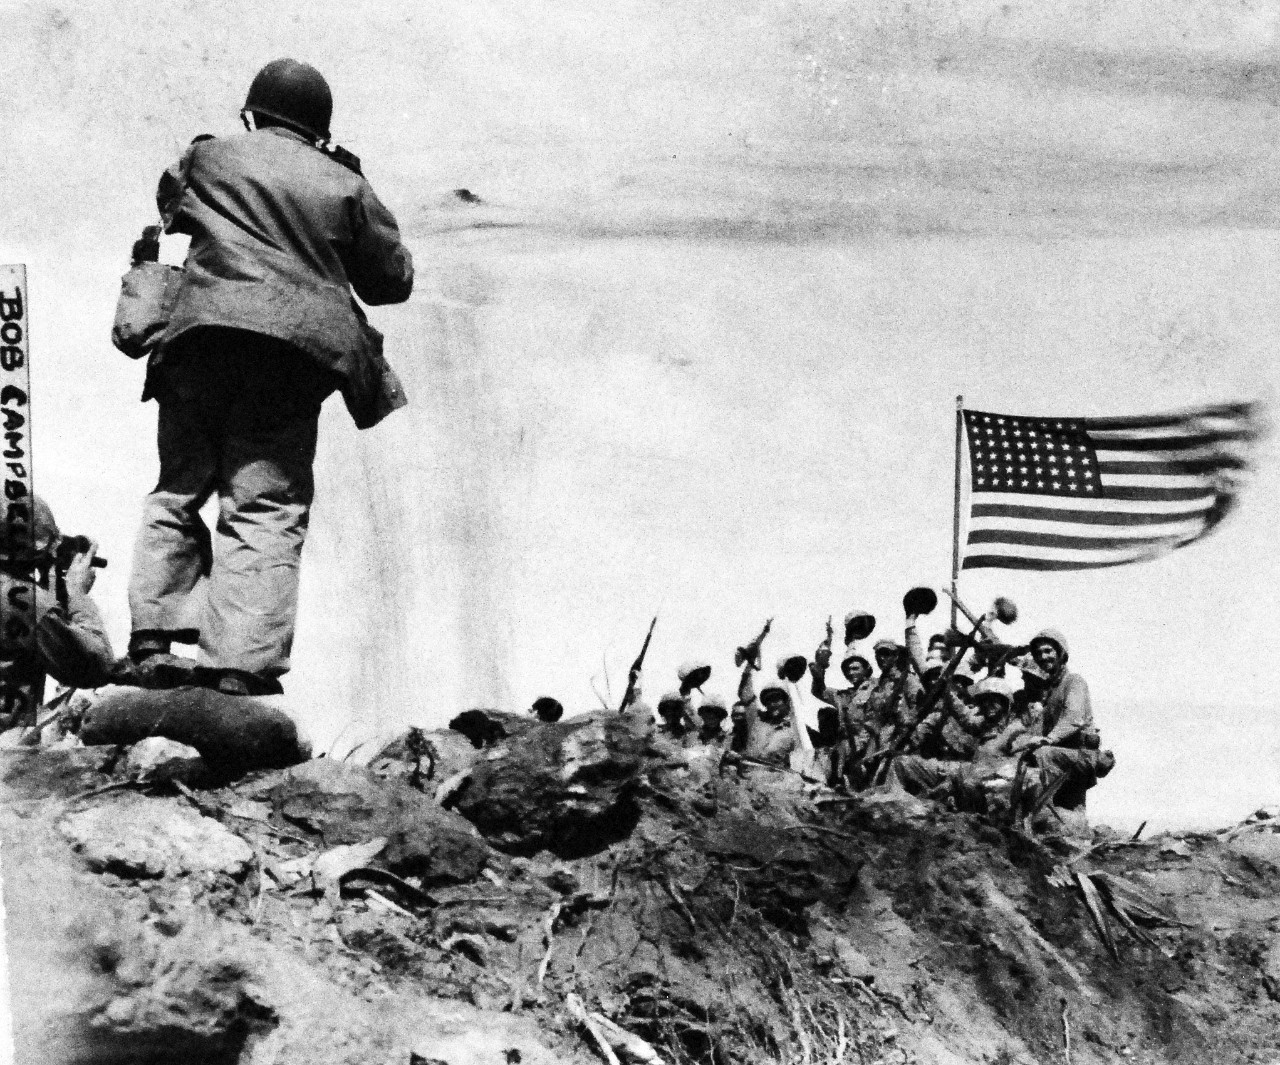 127-GW-319-112720: Iwo Jima Operations, February 1945.   Victors – In the stiff breeze atop Mount Suribachi, Iwo Jima, “Old Glory” whips against the sky as cheering Marines raise their voices and weapons in the historic moment for posterity.  Note, Joe Rosenthal, photographer is in the left foreground.   Photographed by Bob Campbell, February 23, 1945.   Official U.S. Marine Corps Photograph, now in the collections of the National Archives.  (2016/09/06).